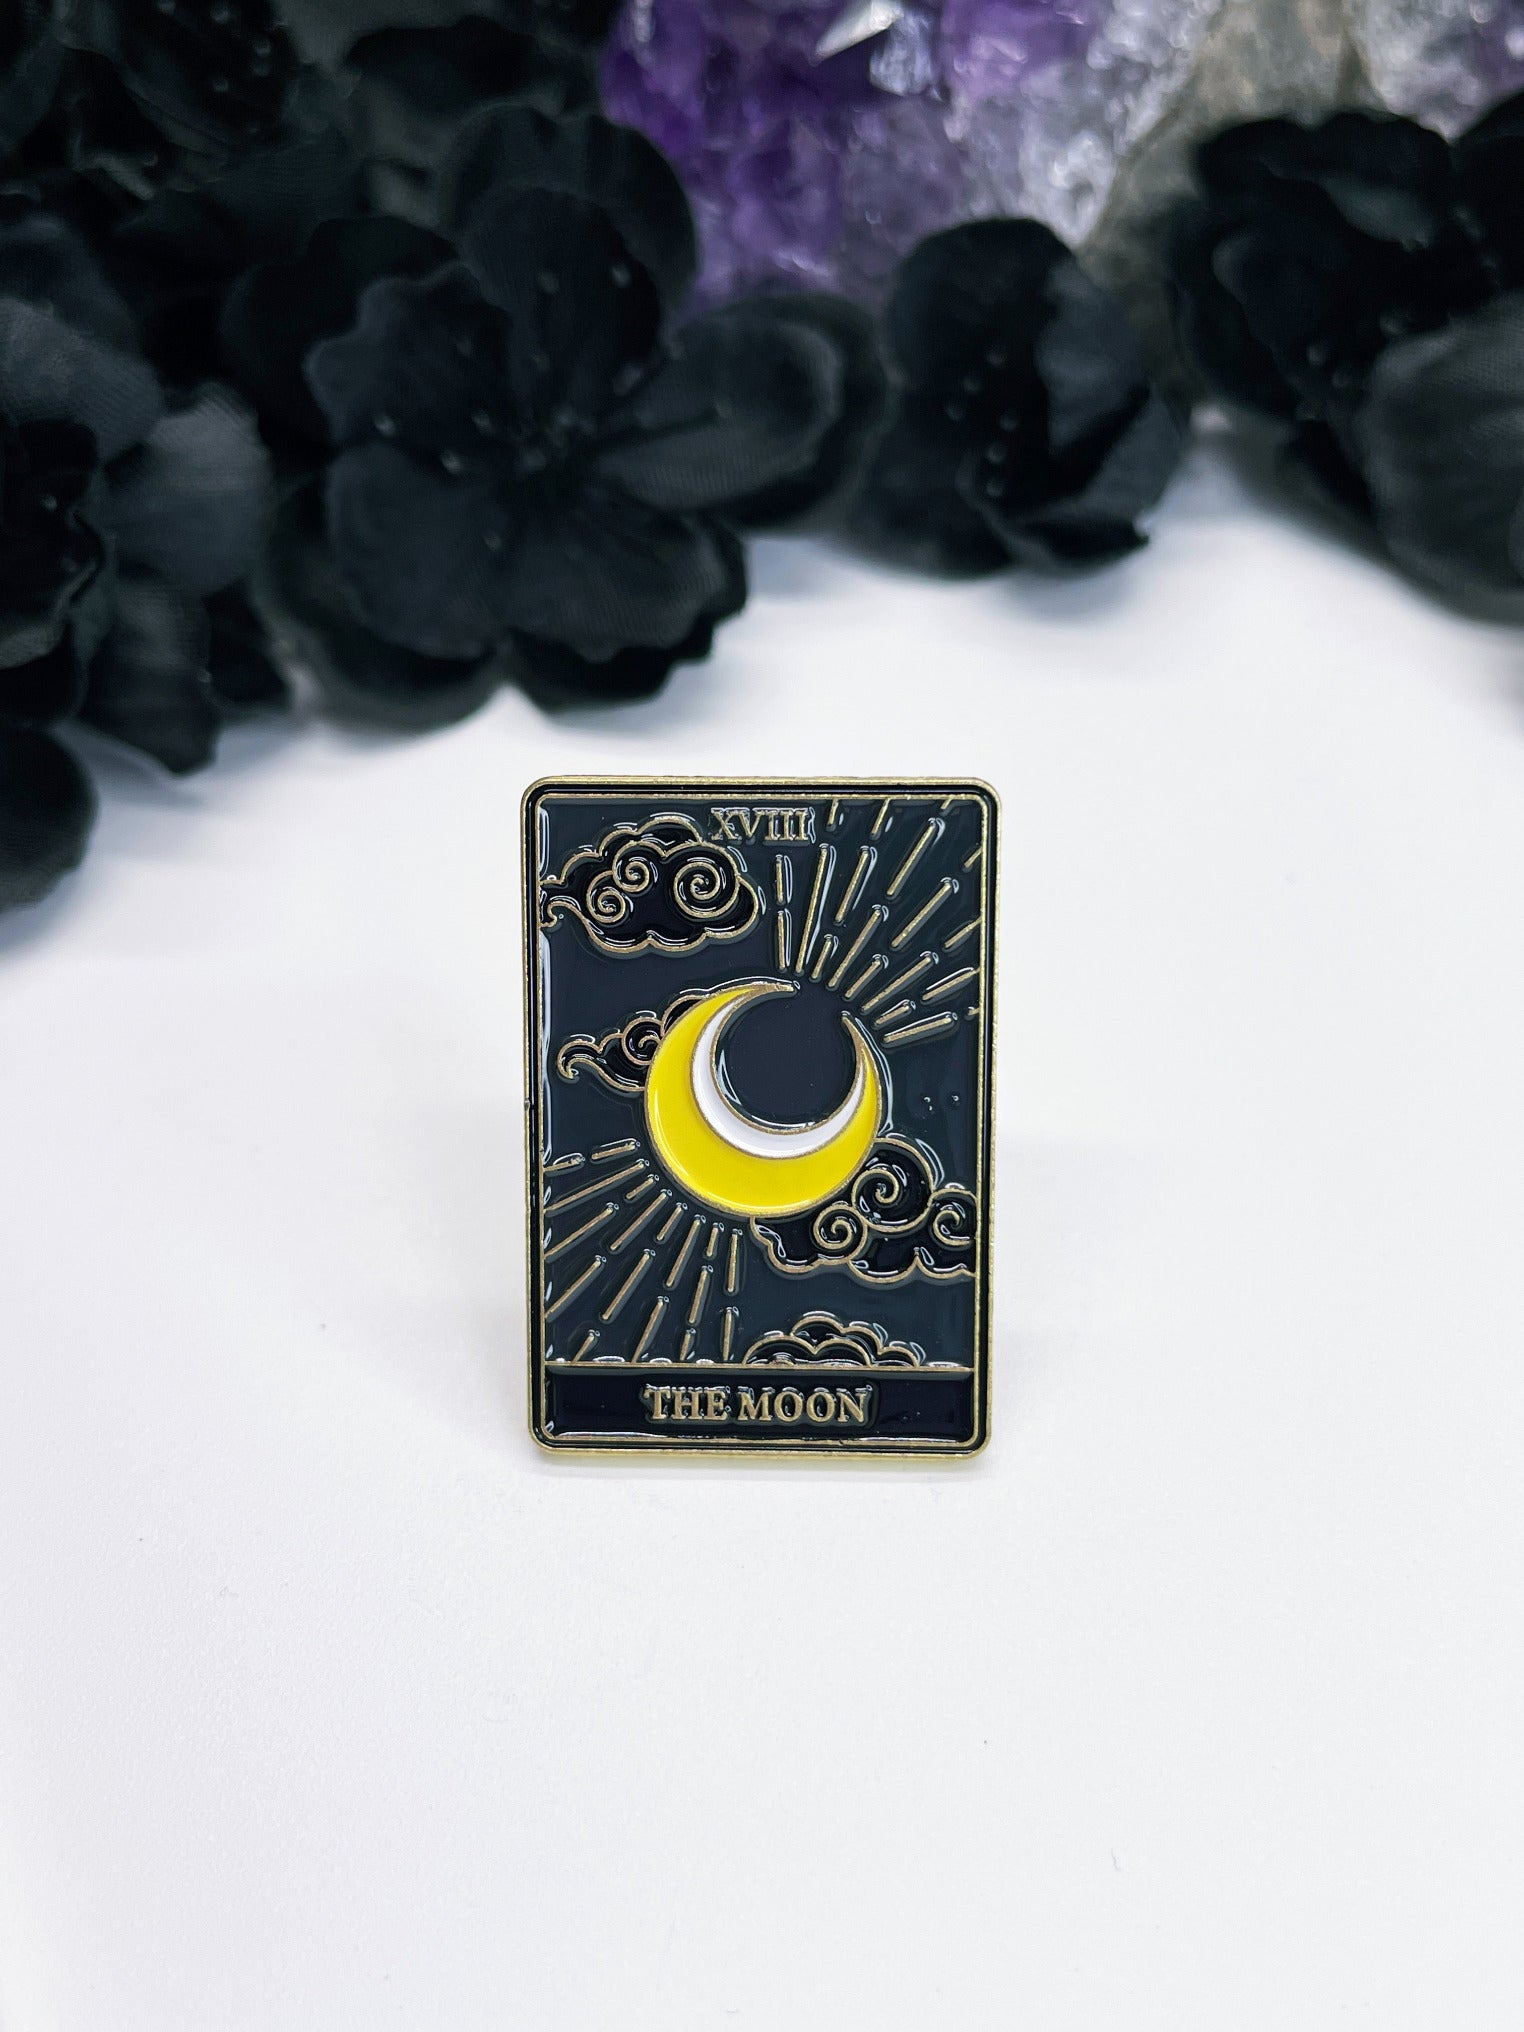  An enamel pin featuring a tarot card with a crescent moon on it, the card is "The Moon."